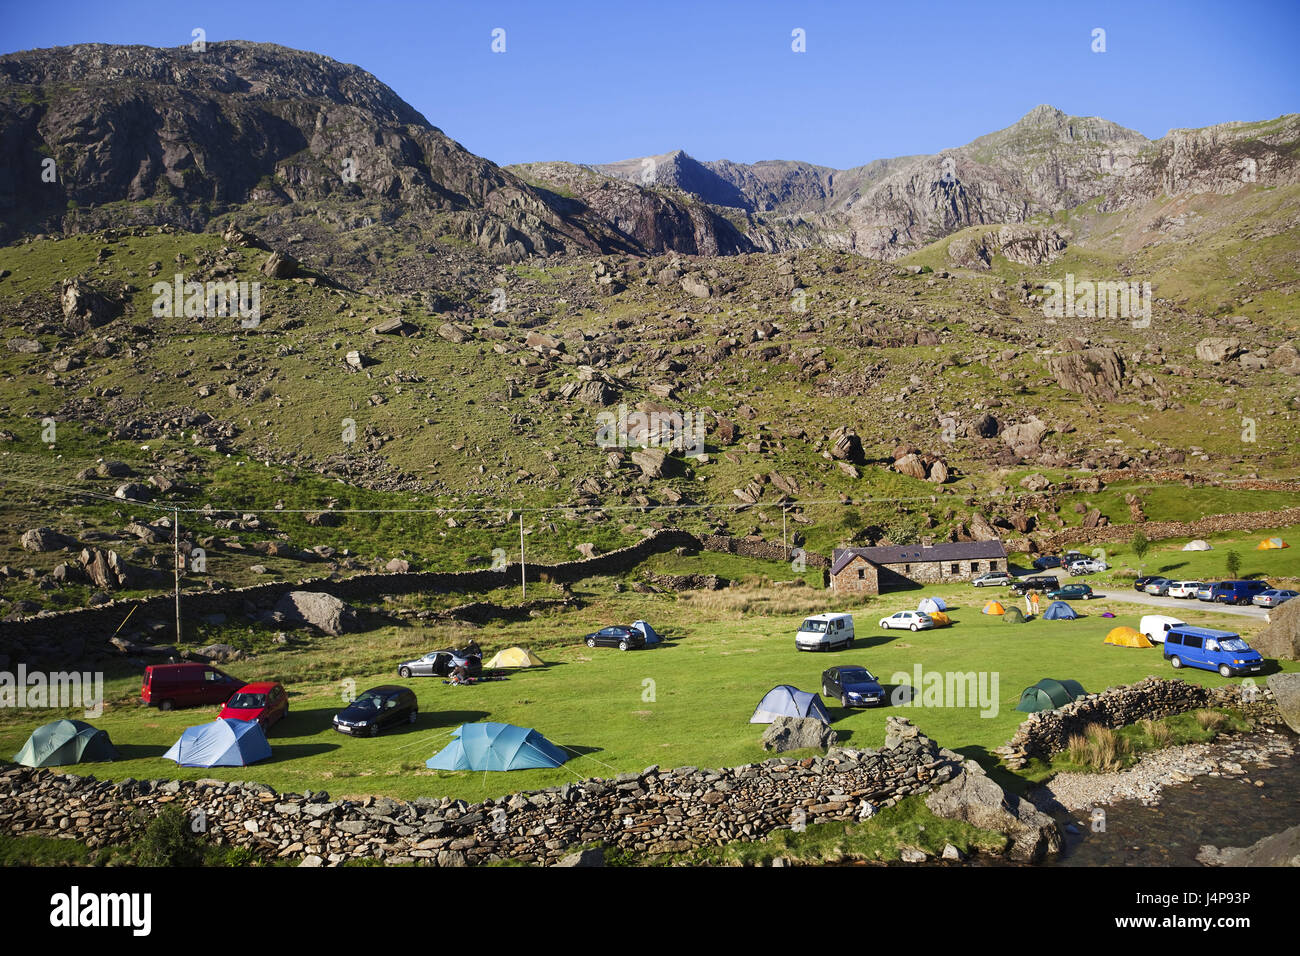 Wales, Gwynedd, Snowdonia national park, camping site, mountains, Stock Photo